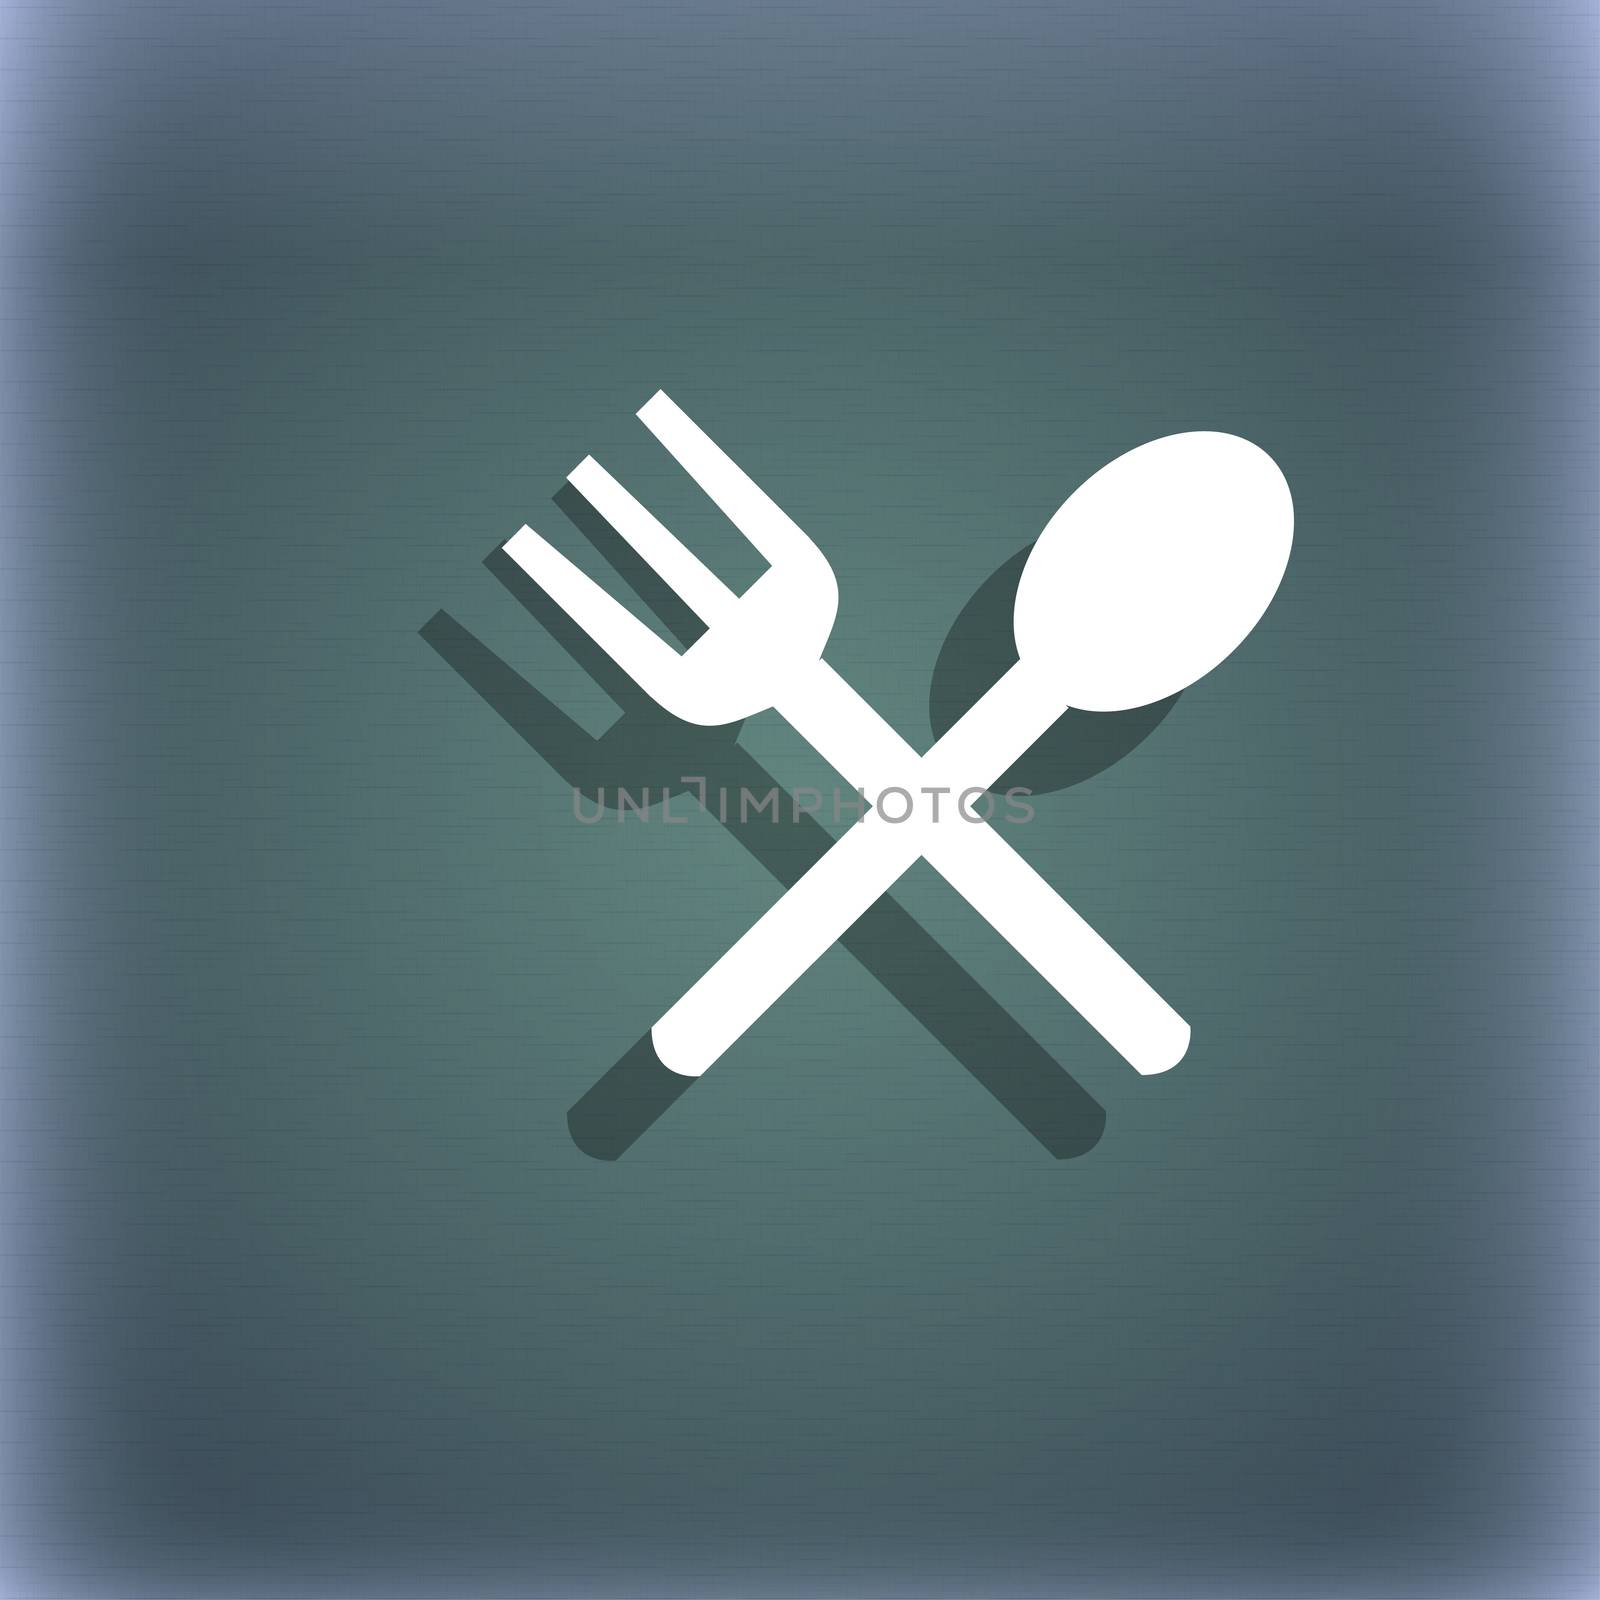 Fork and spoon crosswise, Cutlery, Eat icon sign. On the blue-green abstract background with shadow and space for your text.  by serhii_lohvyniuk